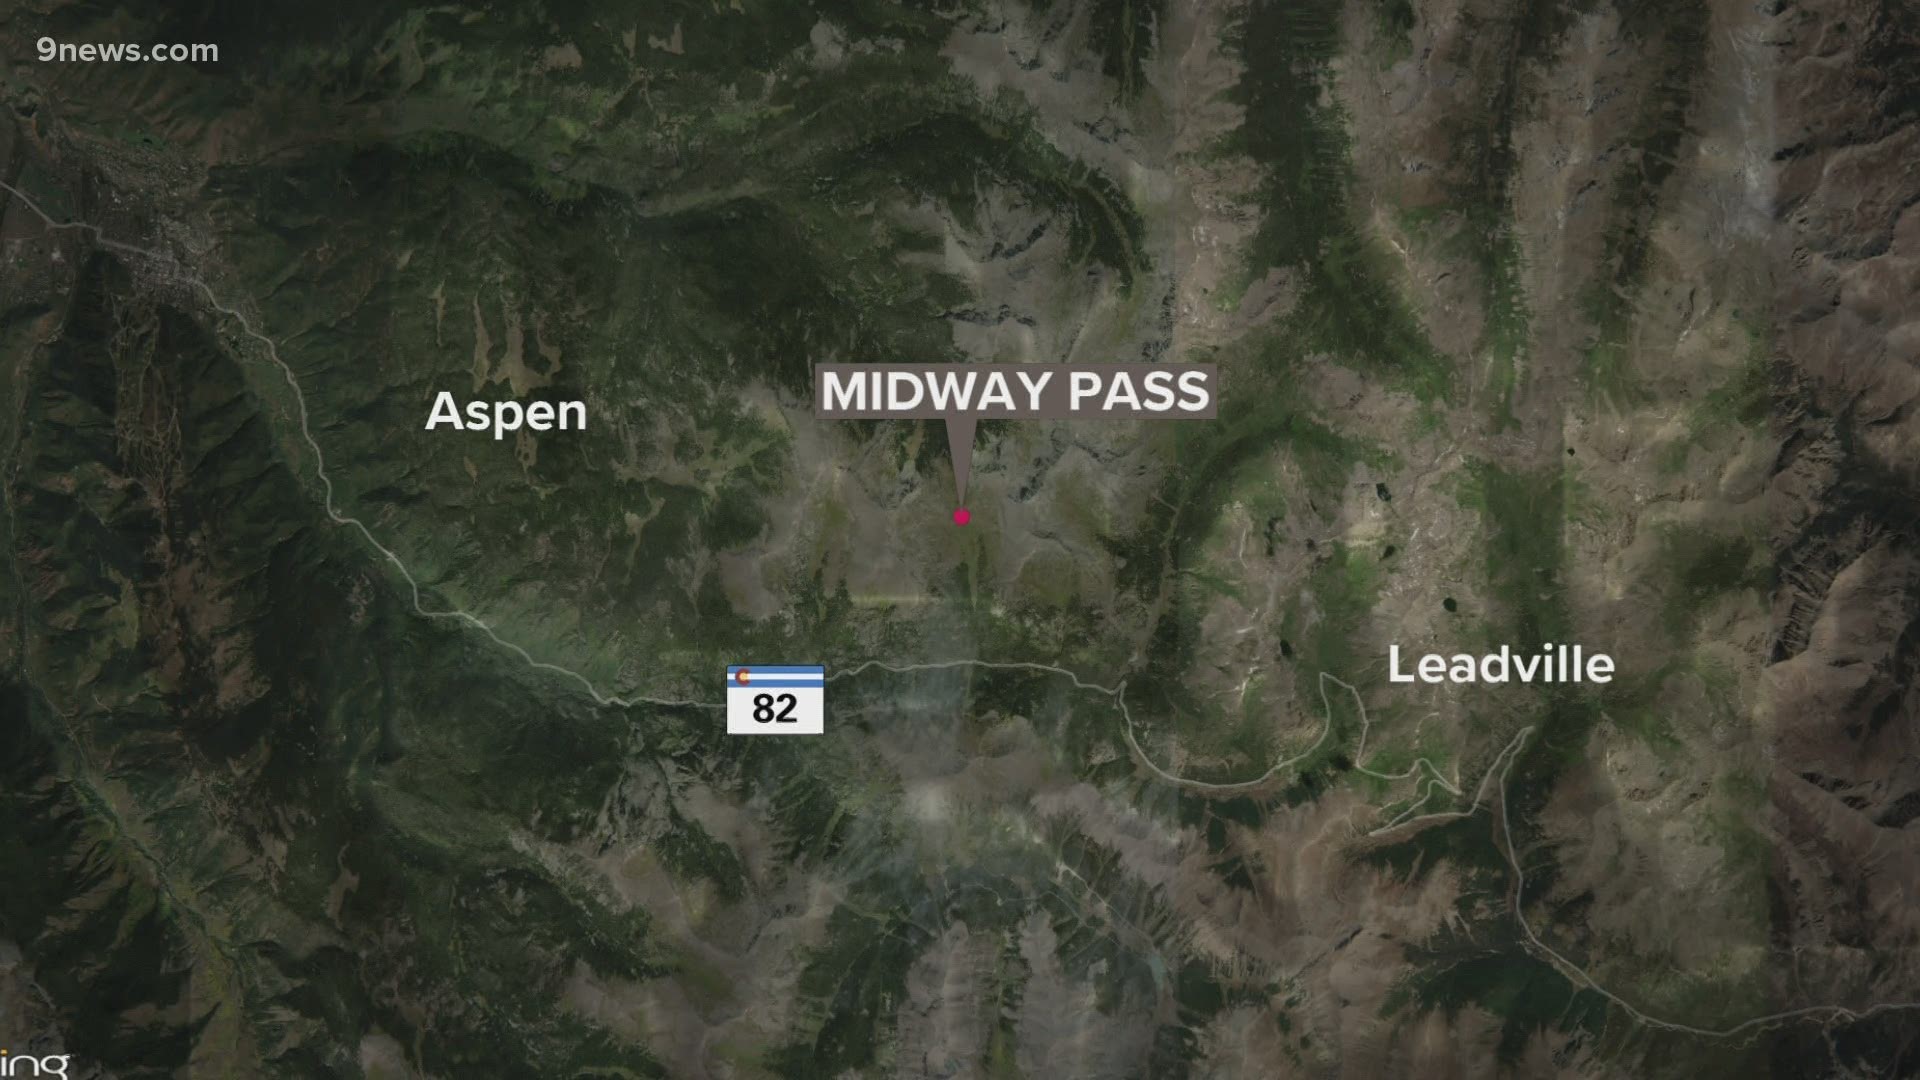 The wreckage was found in an area near Midway Pass, about nine miles east of Aspen.